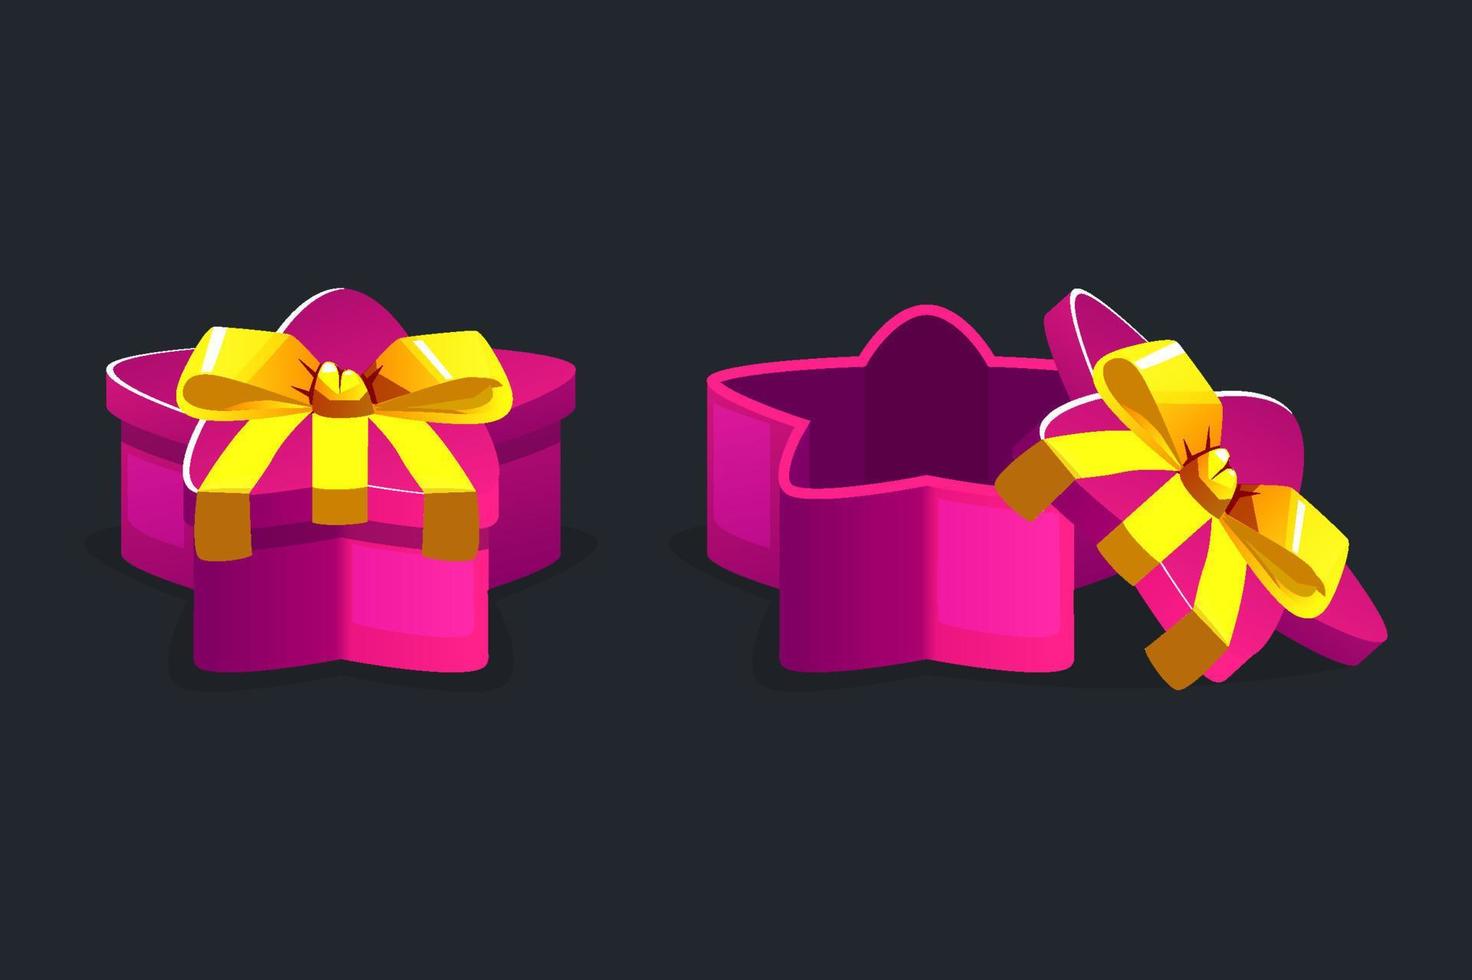 Open and closed star shaped gift boxes for games. Vector illustration set of empty purple boxes with bow isolated.